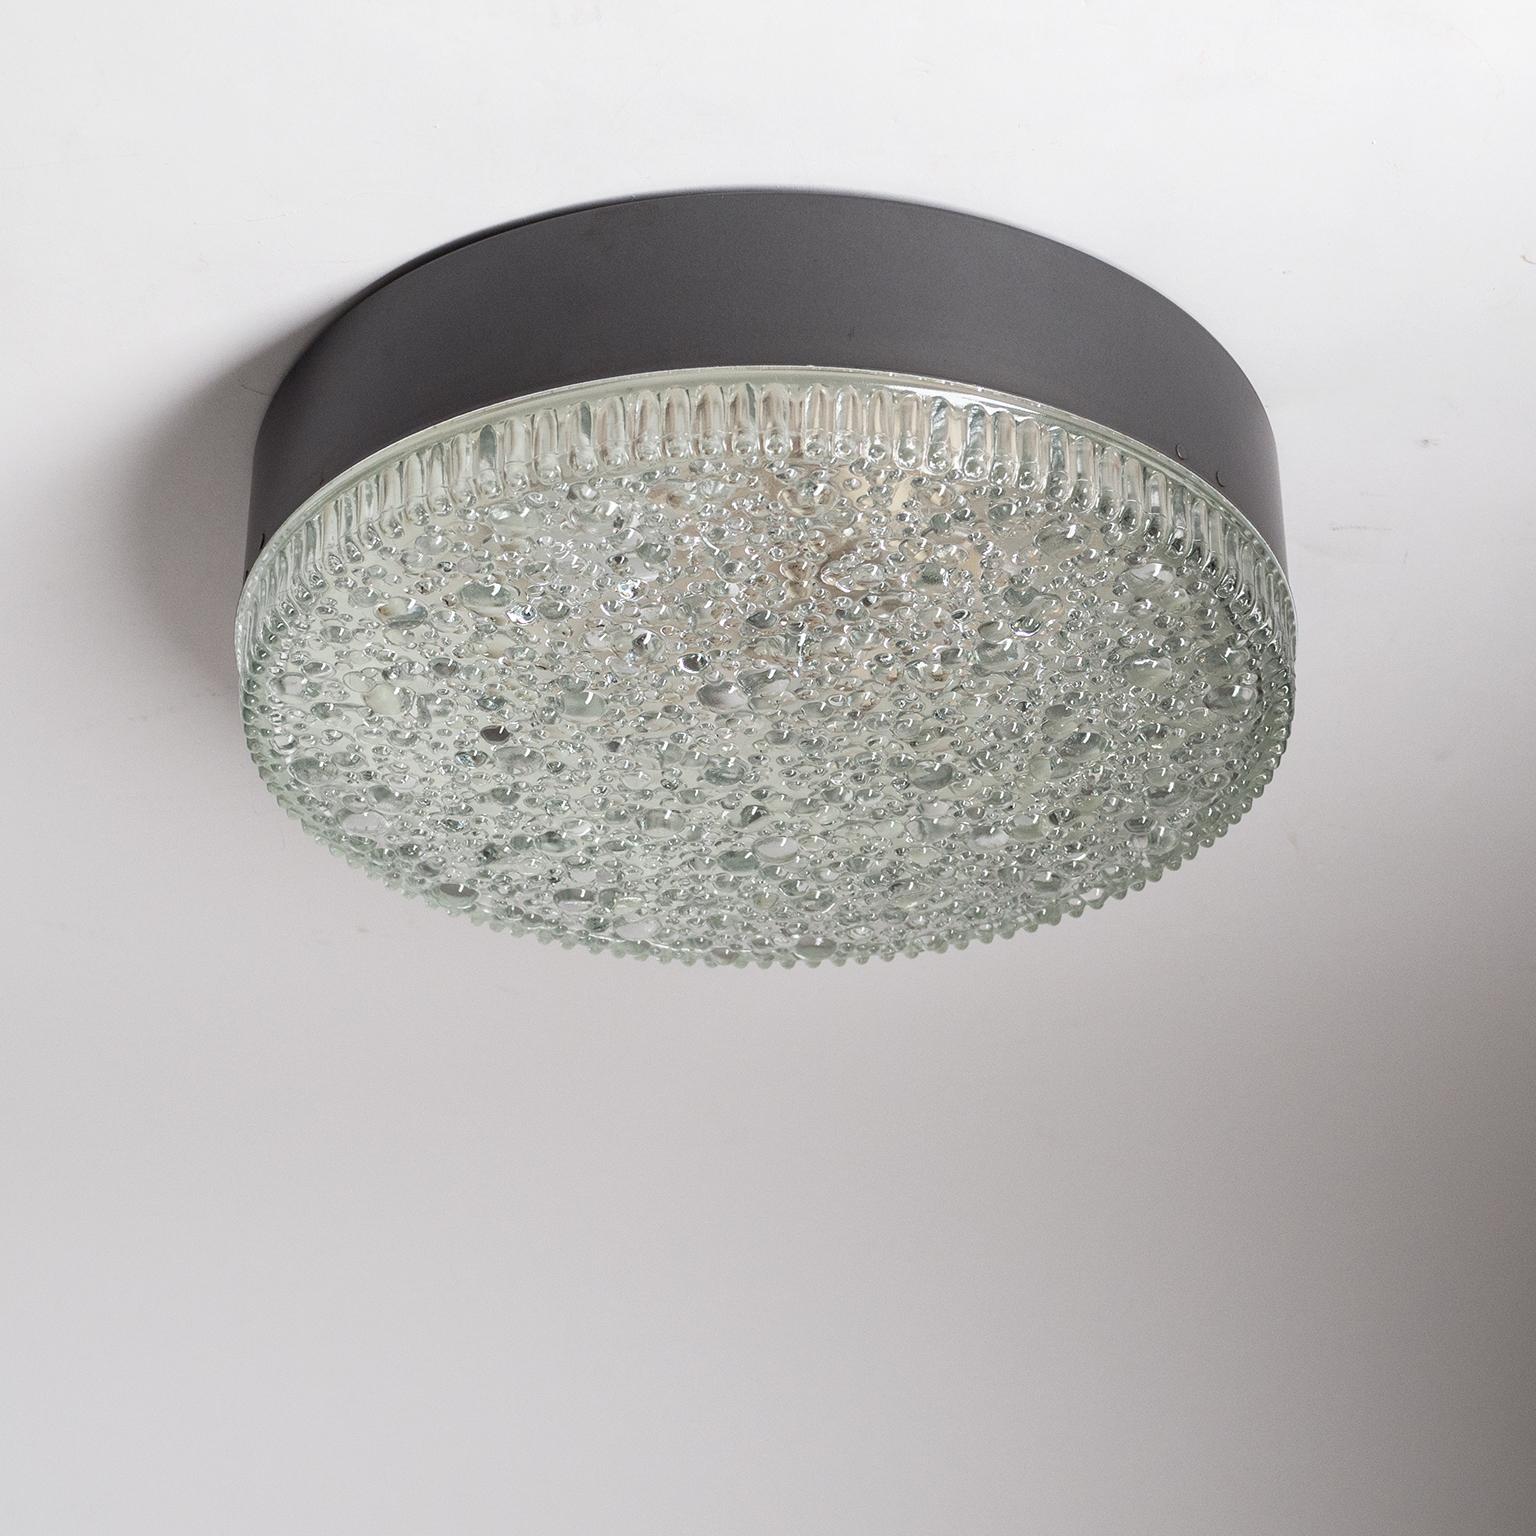 Large bubble glass flush mount (model A230) by Staff, 1960s. A large and heavily textured glass diffuser with 'bubbles' of varying sizes is mounted on a dark grey-metallic lacquered metal base. Good original condition with some discoloring and wear